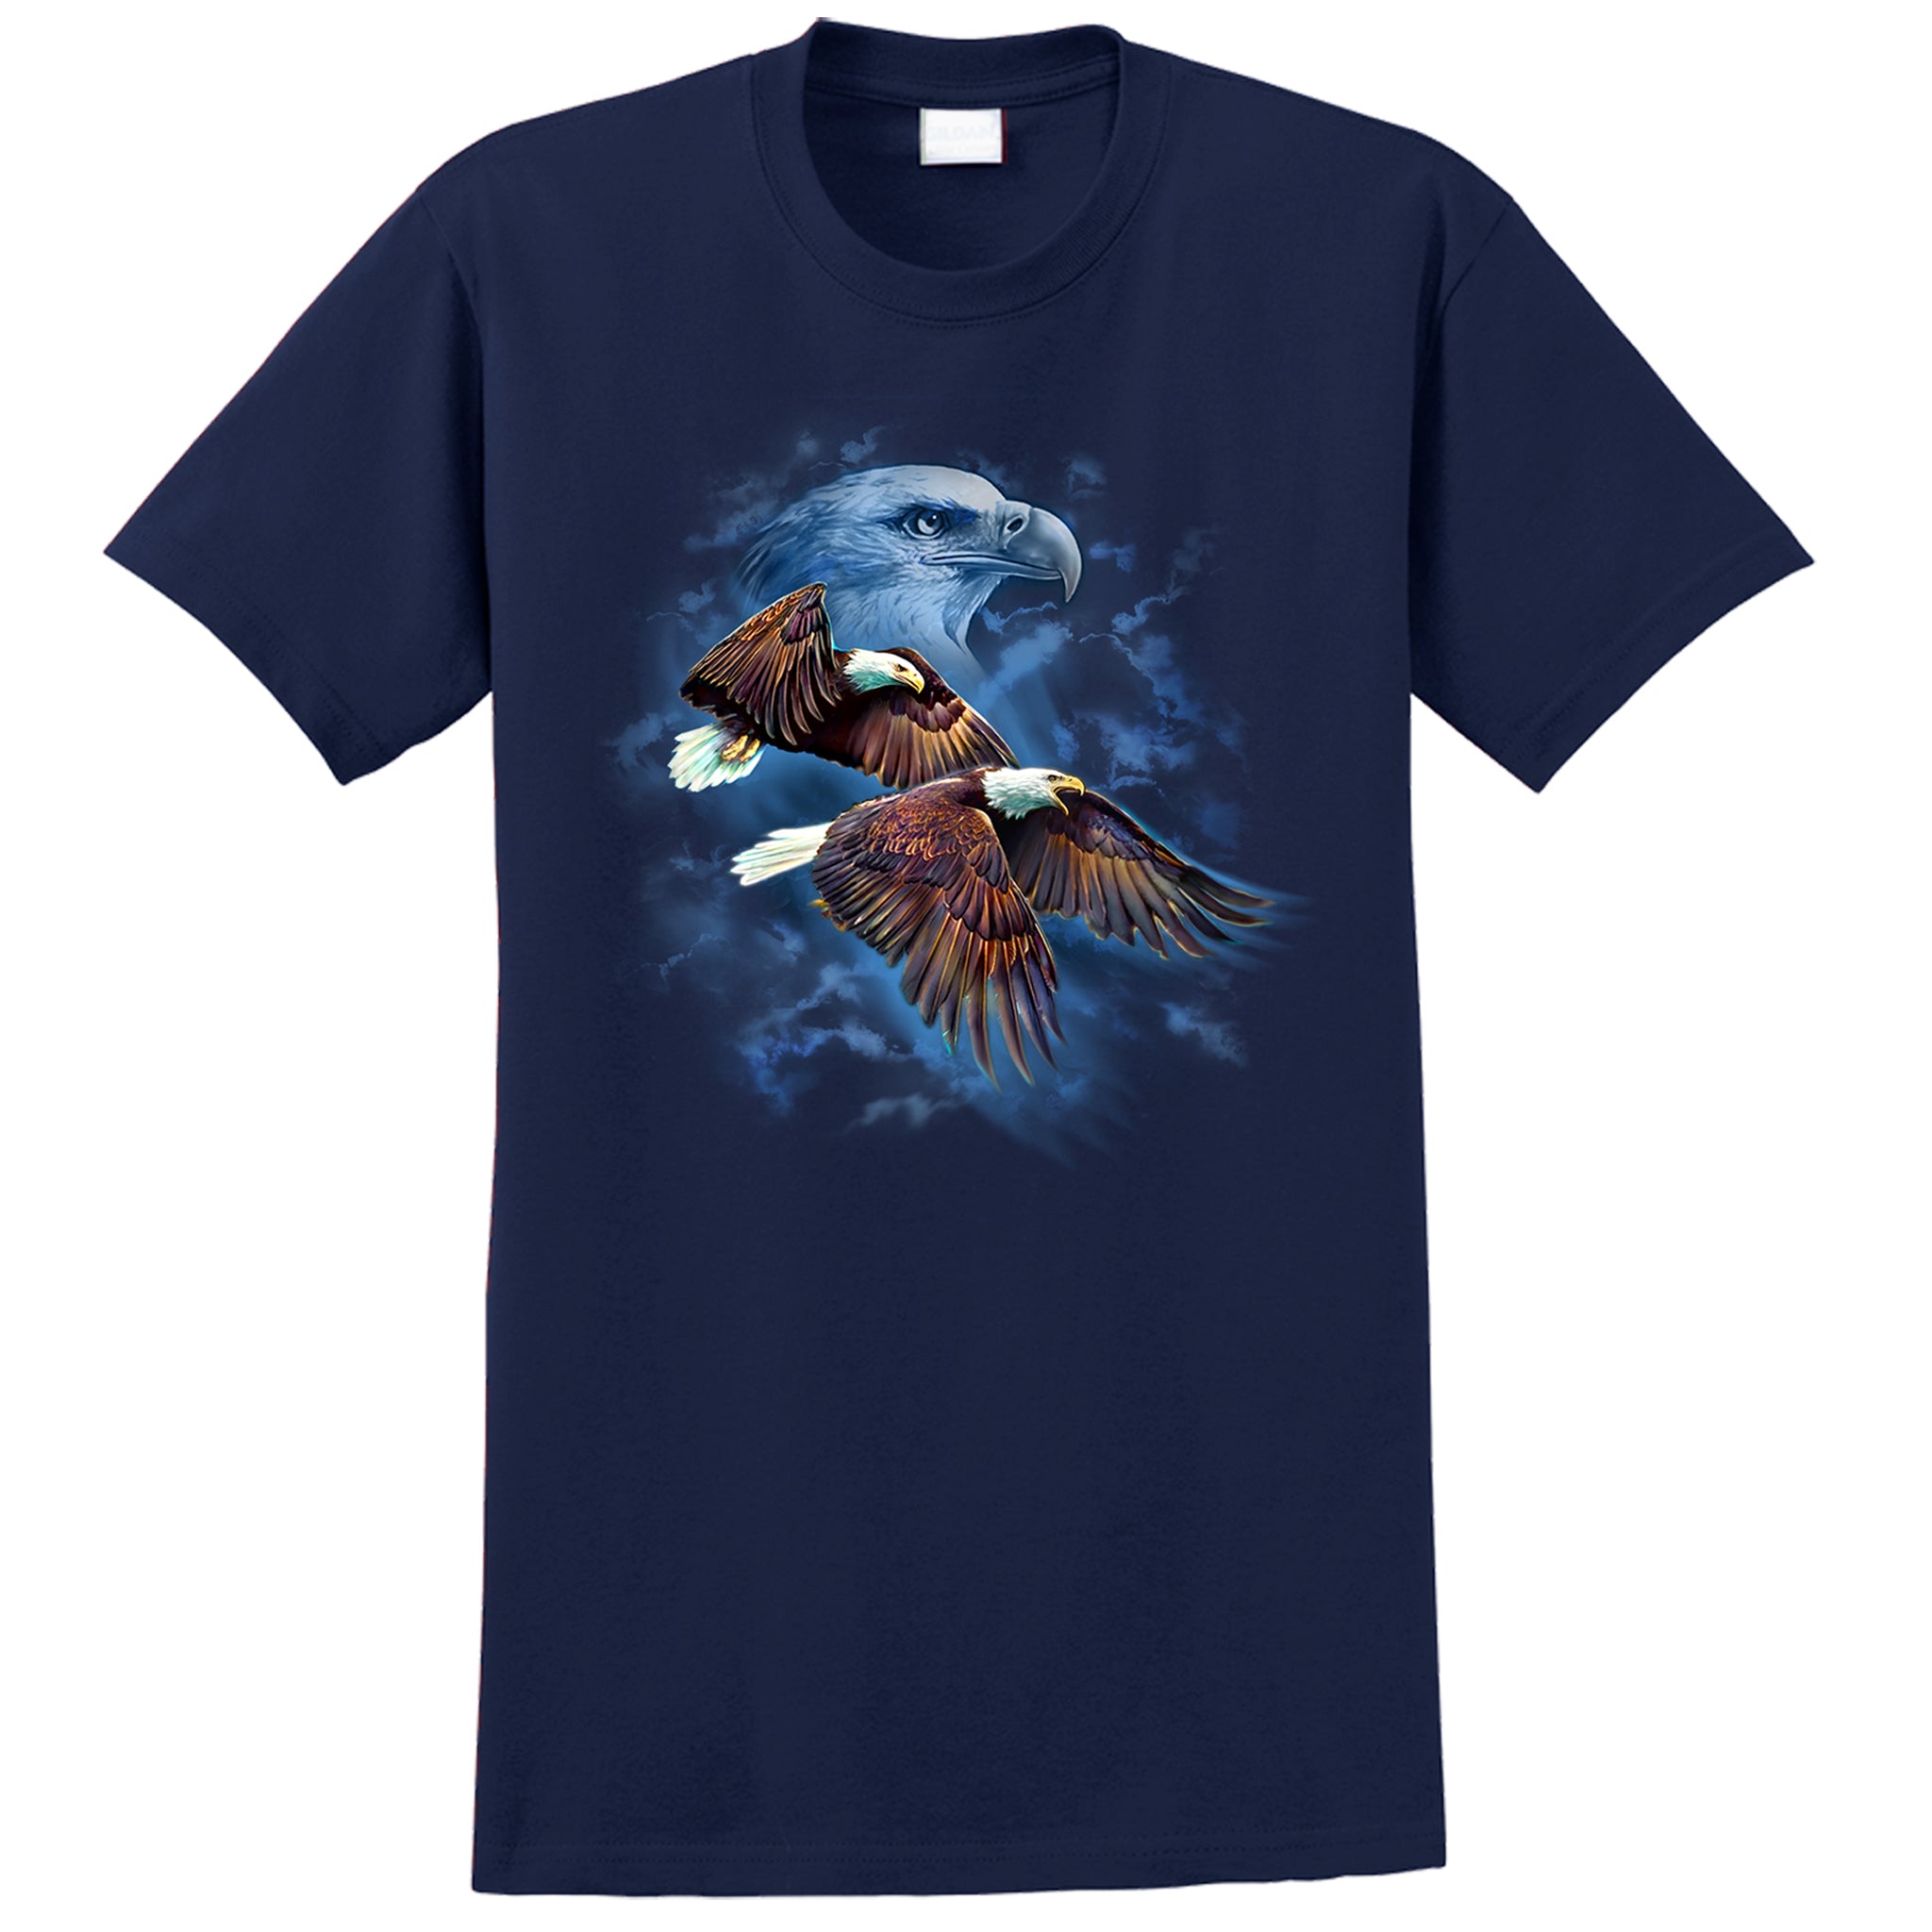 "Night Flyers" T-Shirt - navy t-shirt with eagle art by artist Tami Alba